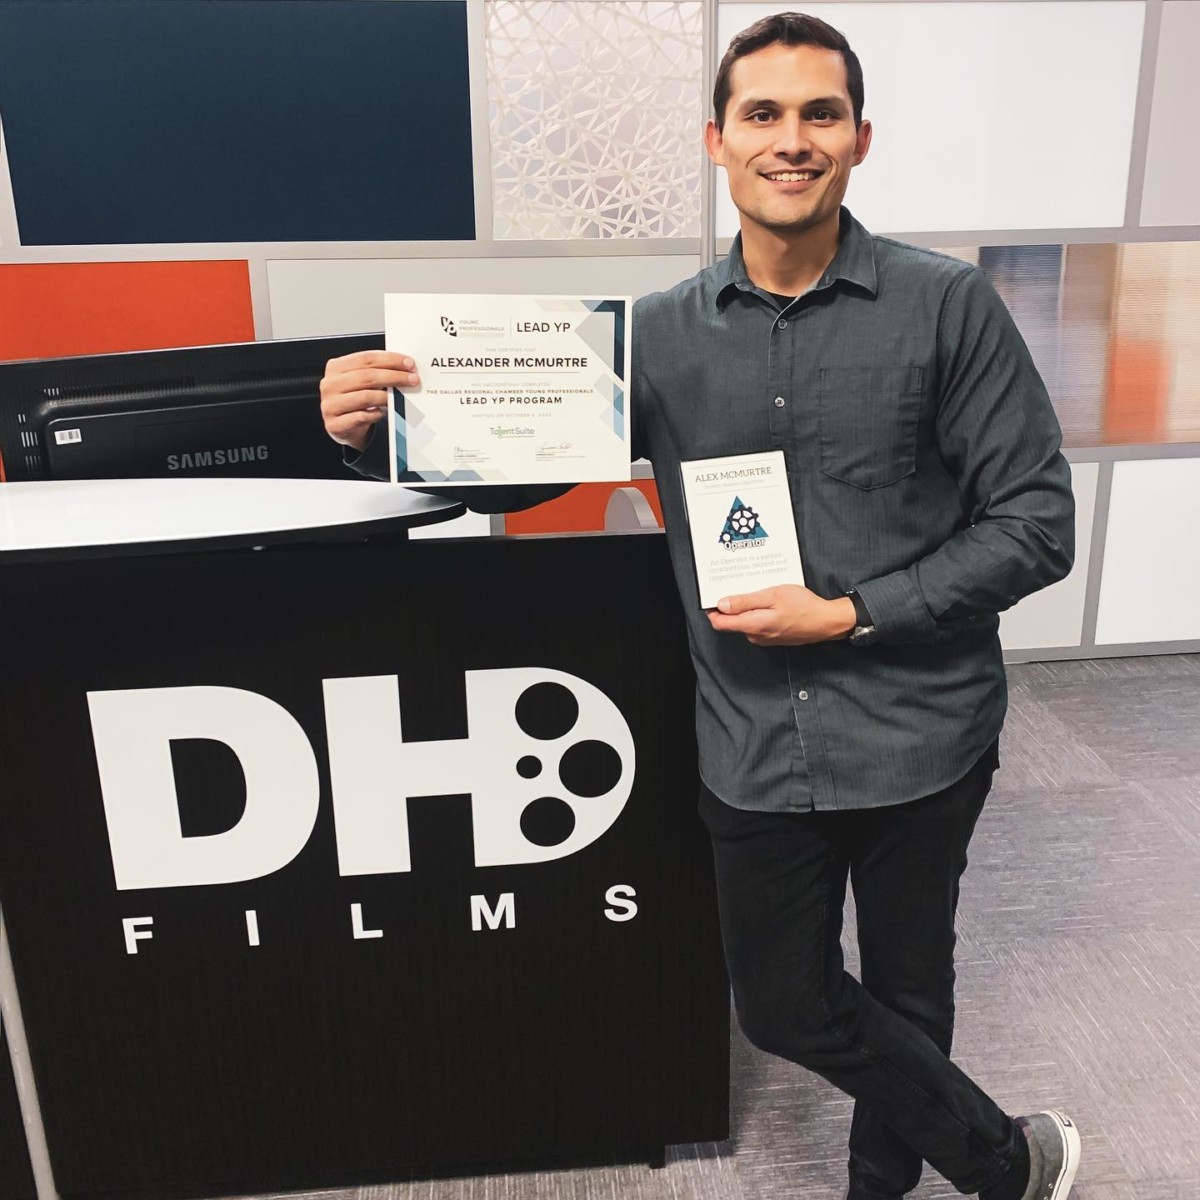 A big congratulations to our Head of Production, Alex McMurtre, for completing the LEAD YP program with the Dallas Regional Chamber.

Alex and his class of 30 young professionals, have spent the last six months meeting regularly to learn and enhance their leadership skills.

Thank you for representing DHD Films, Alex! We are proud of you.

#leadership #leadershipdevelopment #leaders #videoproduction